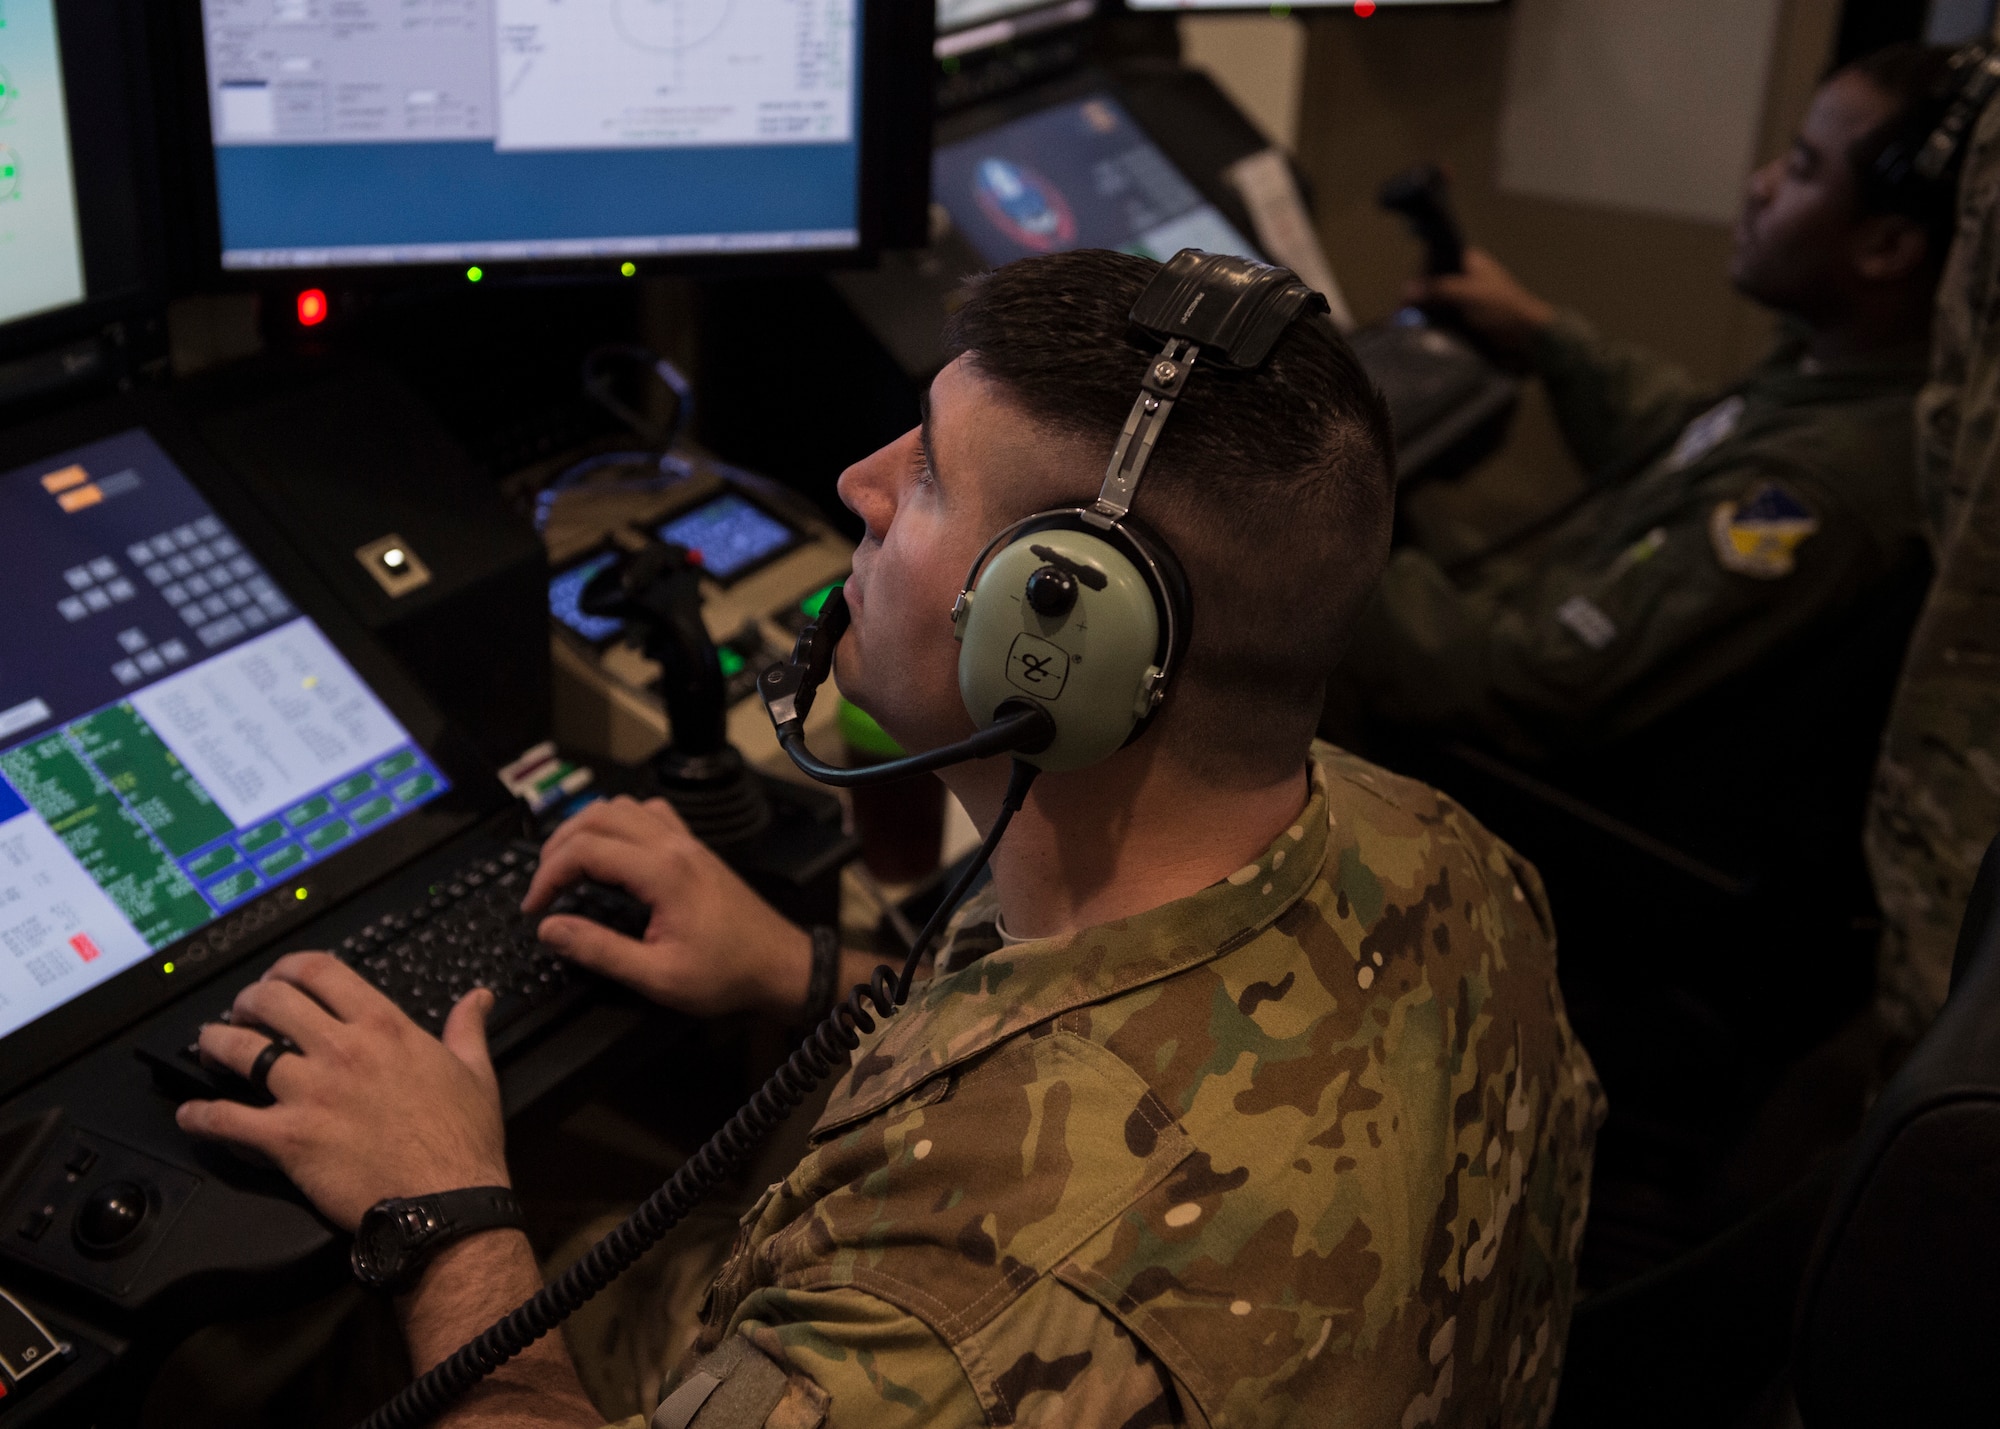 Capt. Joey (left), 6th Attack Squadron MQ-9 Reaper evaluator pilot, and Tech Sgt. Nicholas (right), 6th ATKS MQ-9 sensor operator instructor, simulate an exercise, March 13, 2019, at the 16th Training Squadron on Holloman Air Force Base, N.M. Holloman hosted 351st Special Warfare Training Squadron combat rescue officer students from Kirtland Air Force Base, N.M., March 12-14. (U.S. Air Force photo by Airman 1st Class Kindra Stewart)